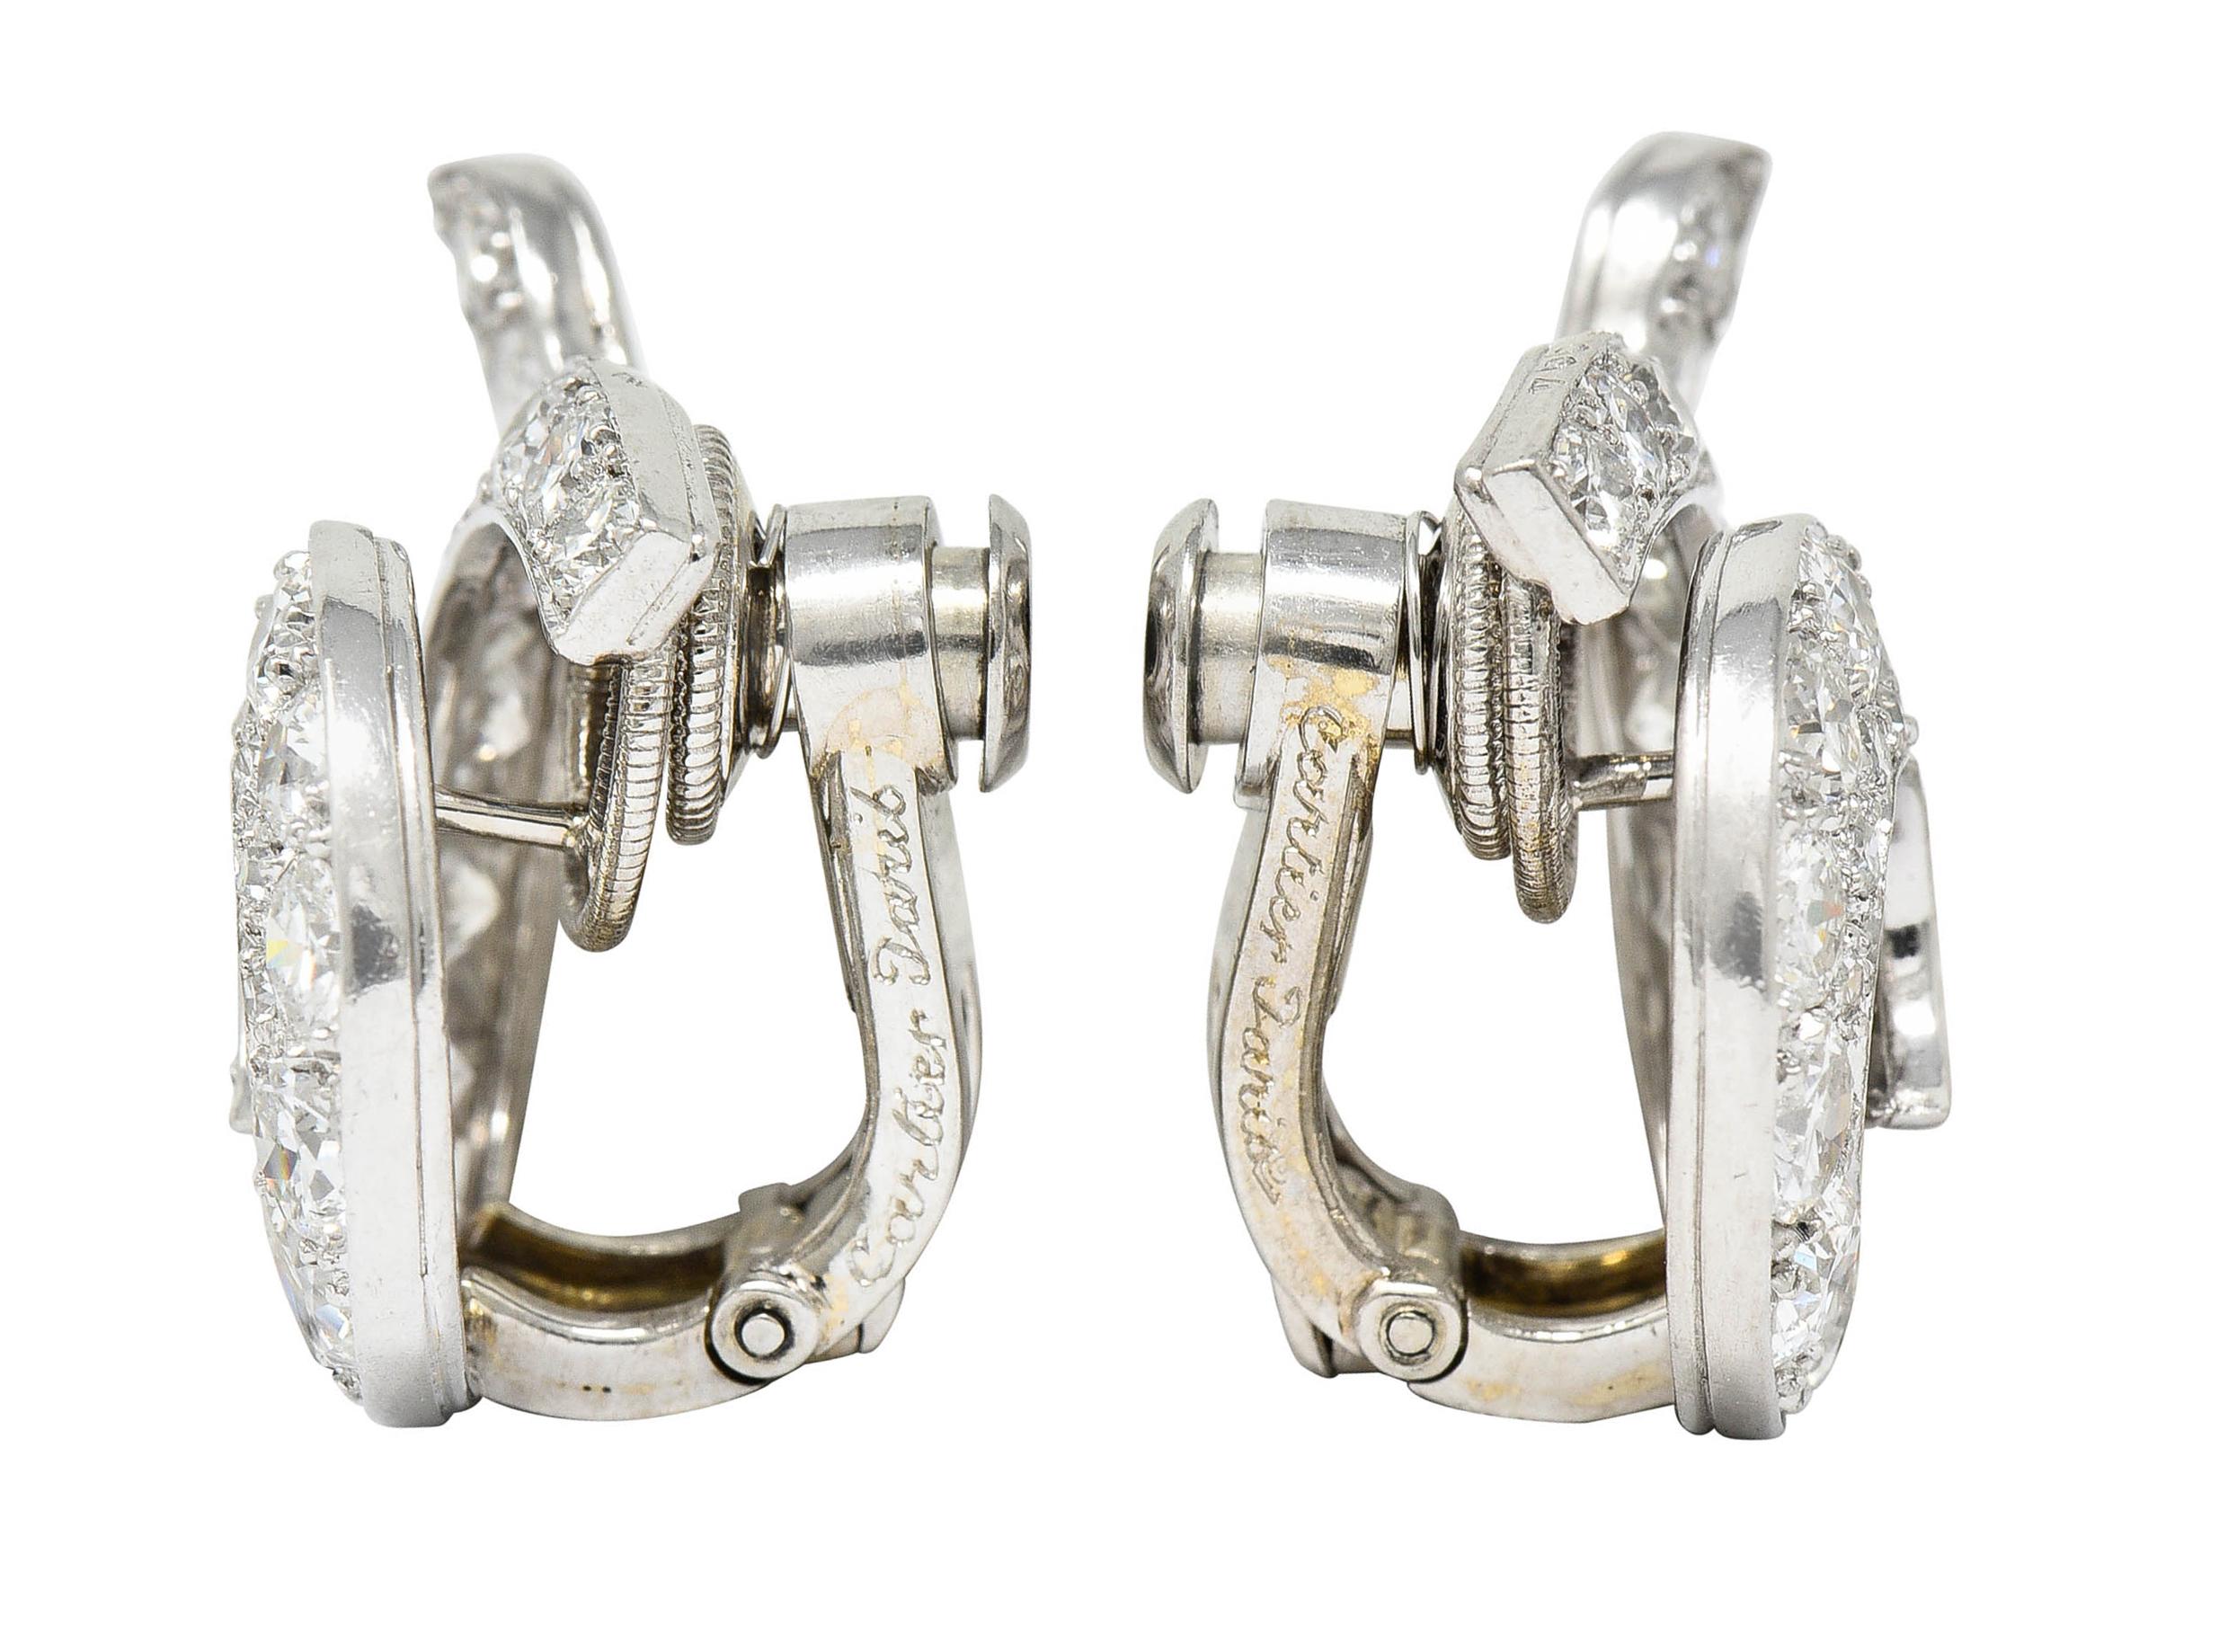 Ear-clips are designed as a spiraled swirl - dynamically formed

Bead set throughout by old European and transitional cut diamonds - graduating in size

Weighing in total approximately 5.00 carats with F to H color and VS to SI clarity

Completed by